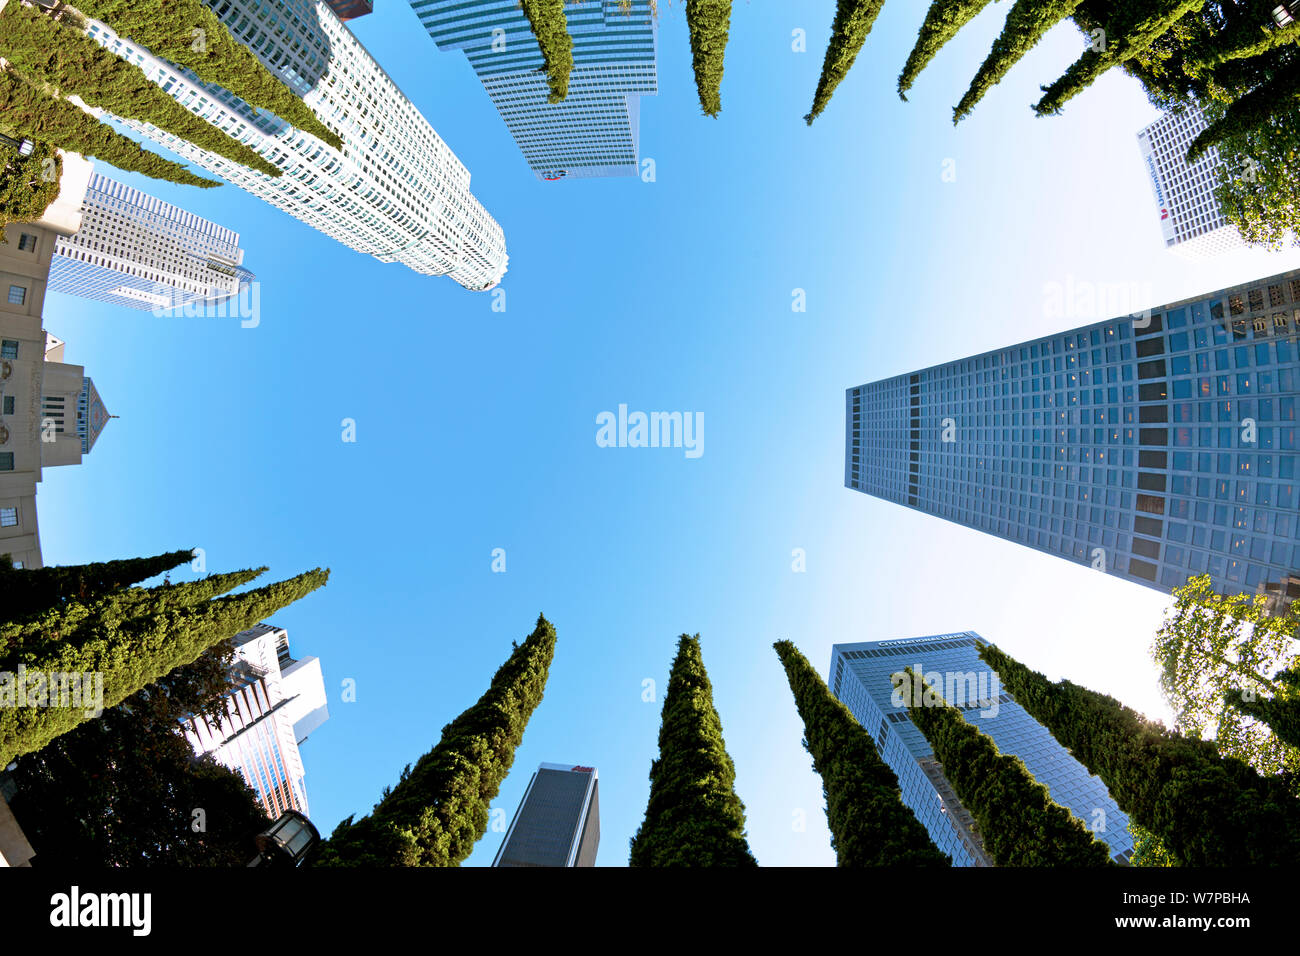 Arty view looking up at skyscrapers and trees in downtown Los Angeles, California, USA, July 2011 Stock Photo